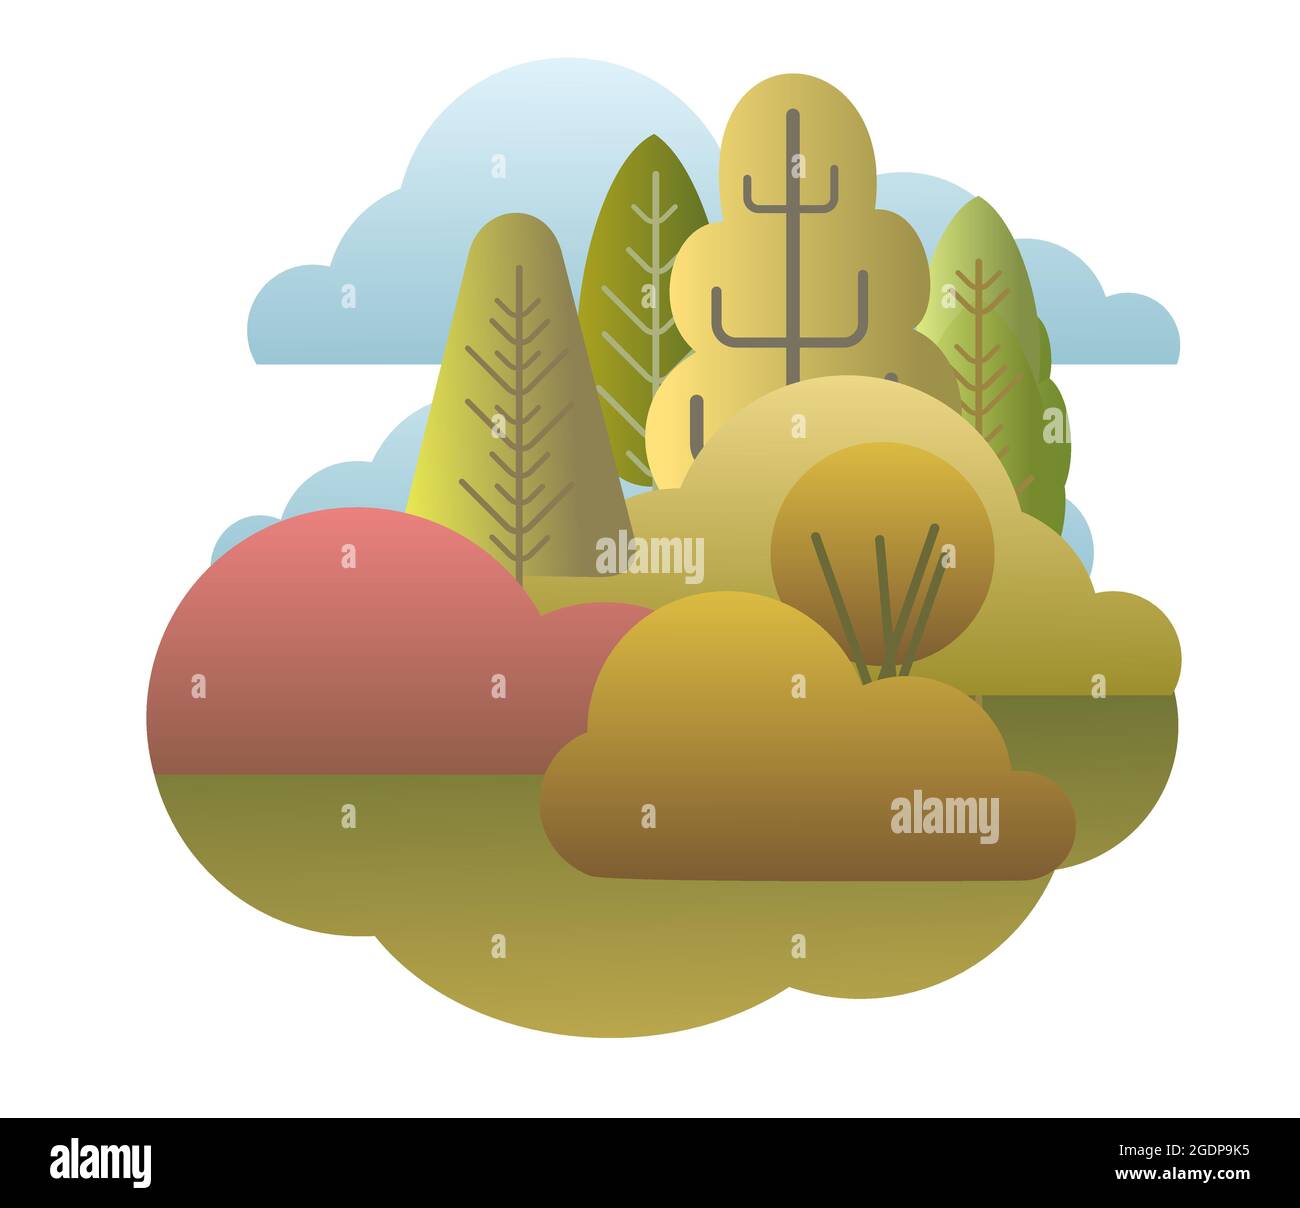 Autumn forest. Flat style symbolic illustration. Landscape in orange, yellow and green tones. Rural wildlife. Country scene with trees and bushes Stock Vector